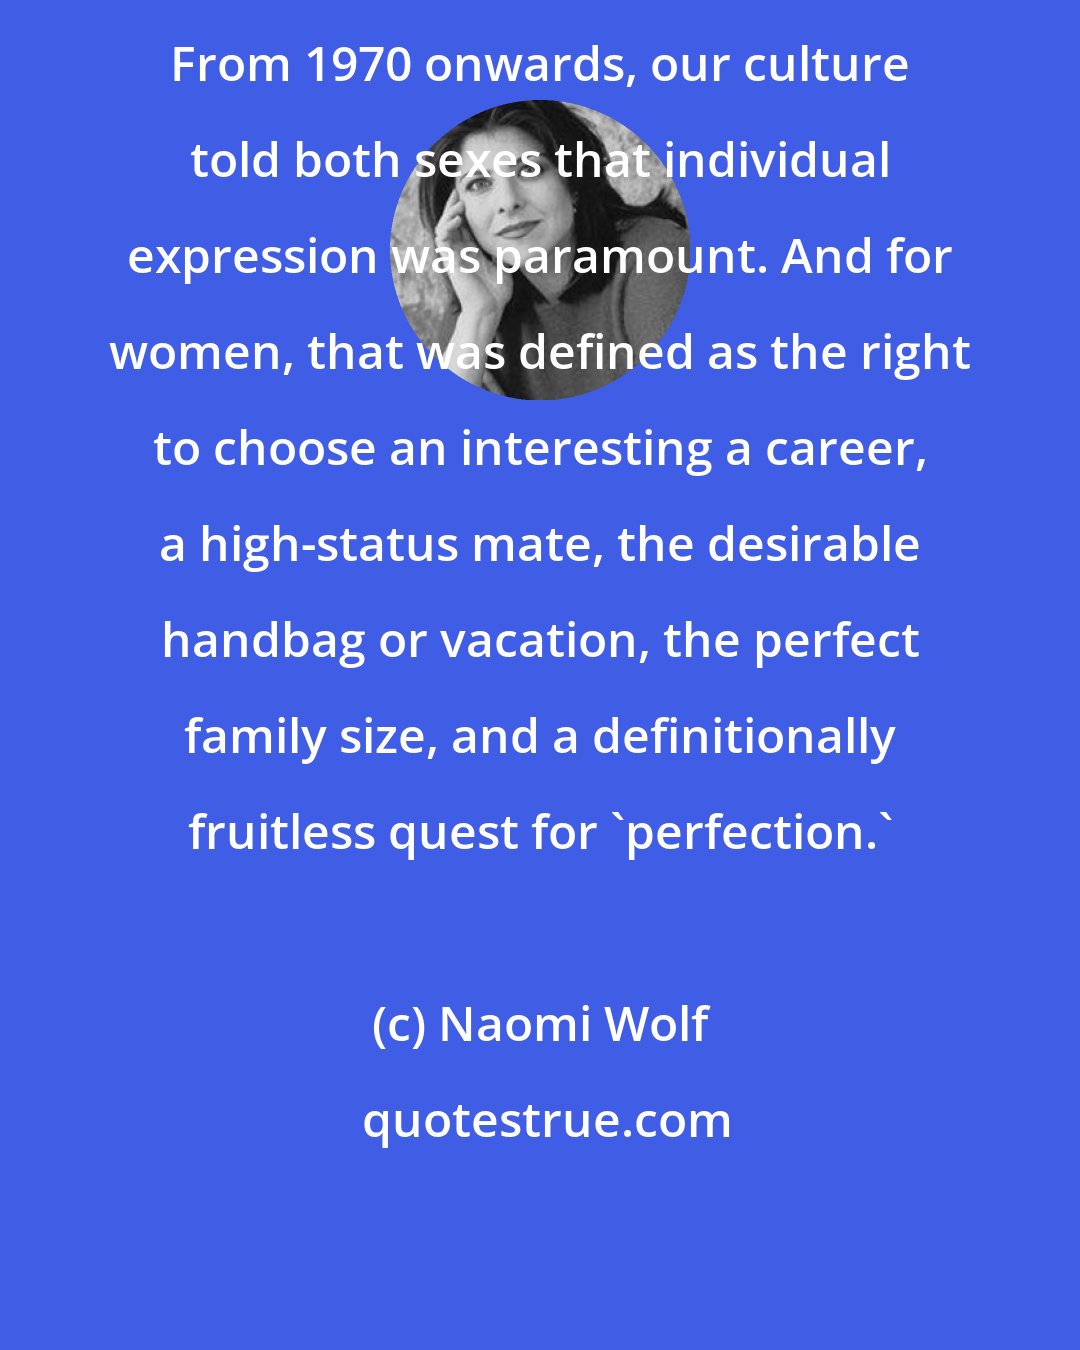 Naomi Wolf: From 1970 onwards, our culture told both sexes that individual expression was paramount. And for women, that was defined as the right to choose an interesting a career, a high-status mate, the desirable handbag or vacation, the perfect family size, and a definitionally fruitless quest for 'perfection.'